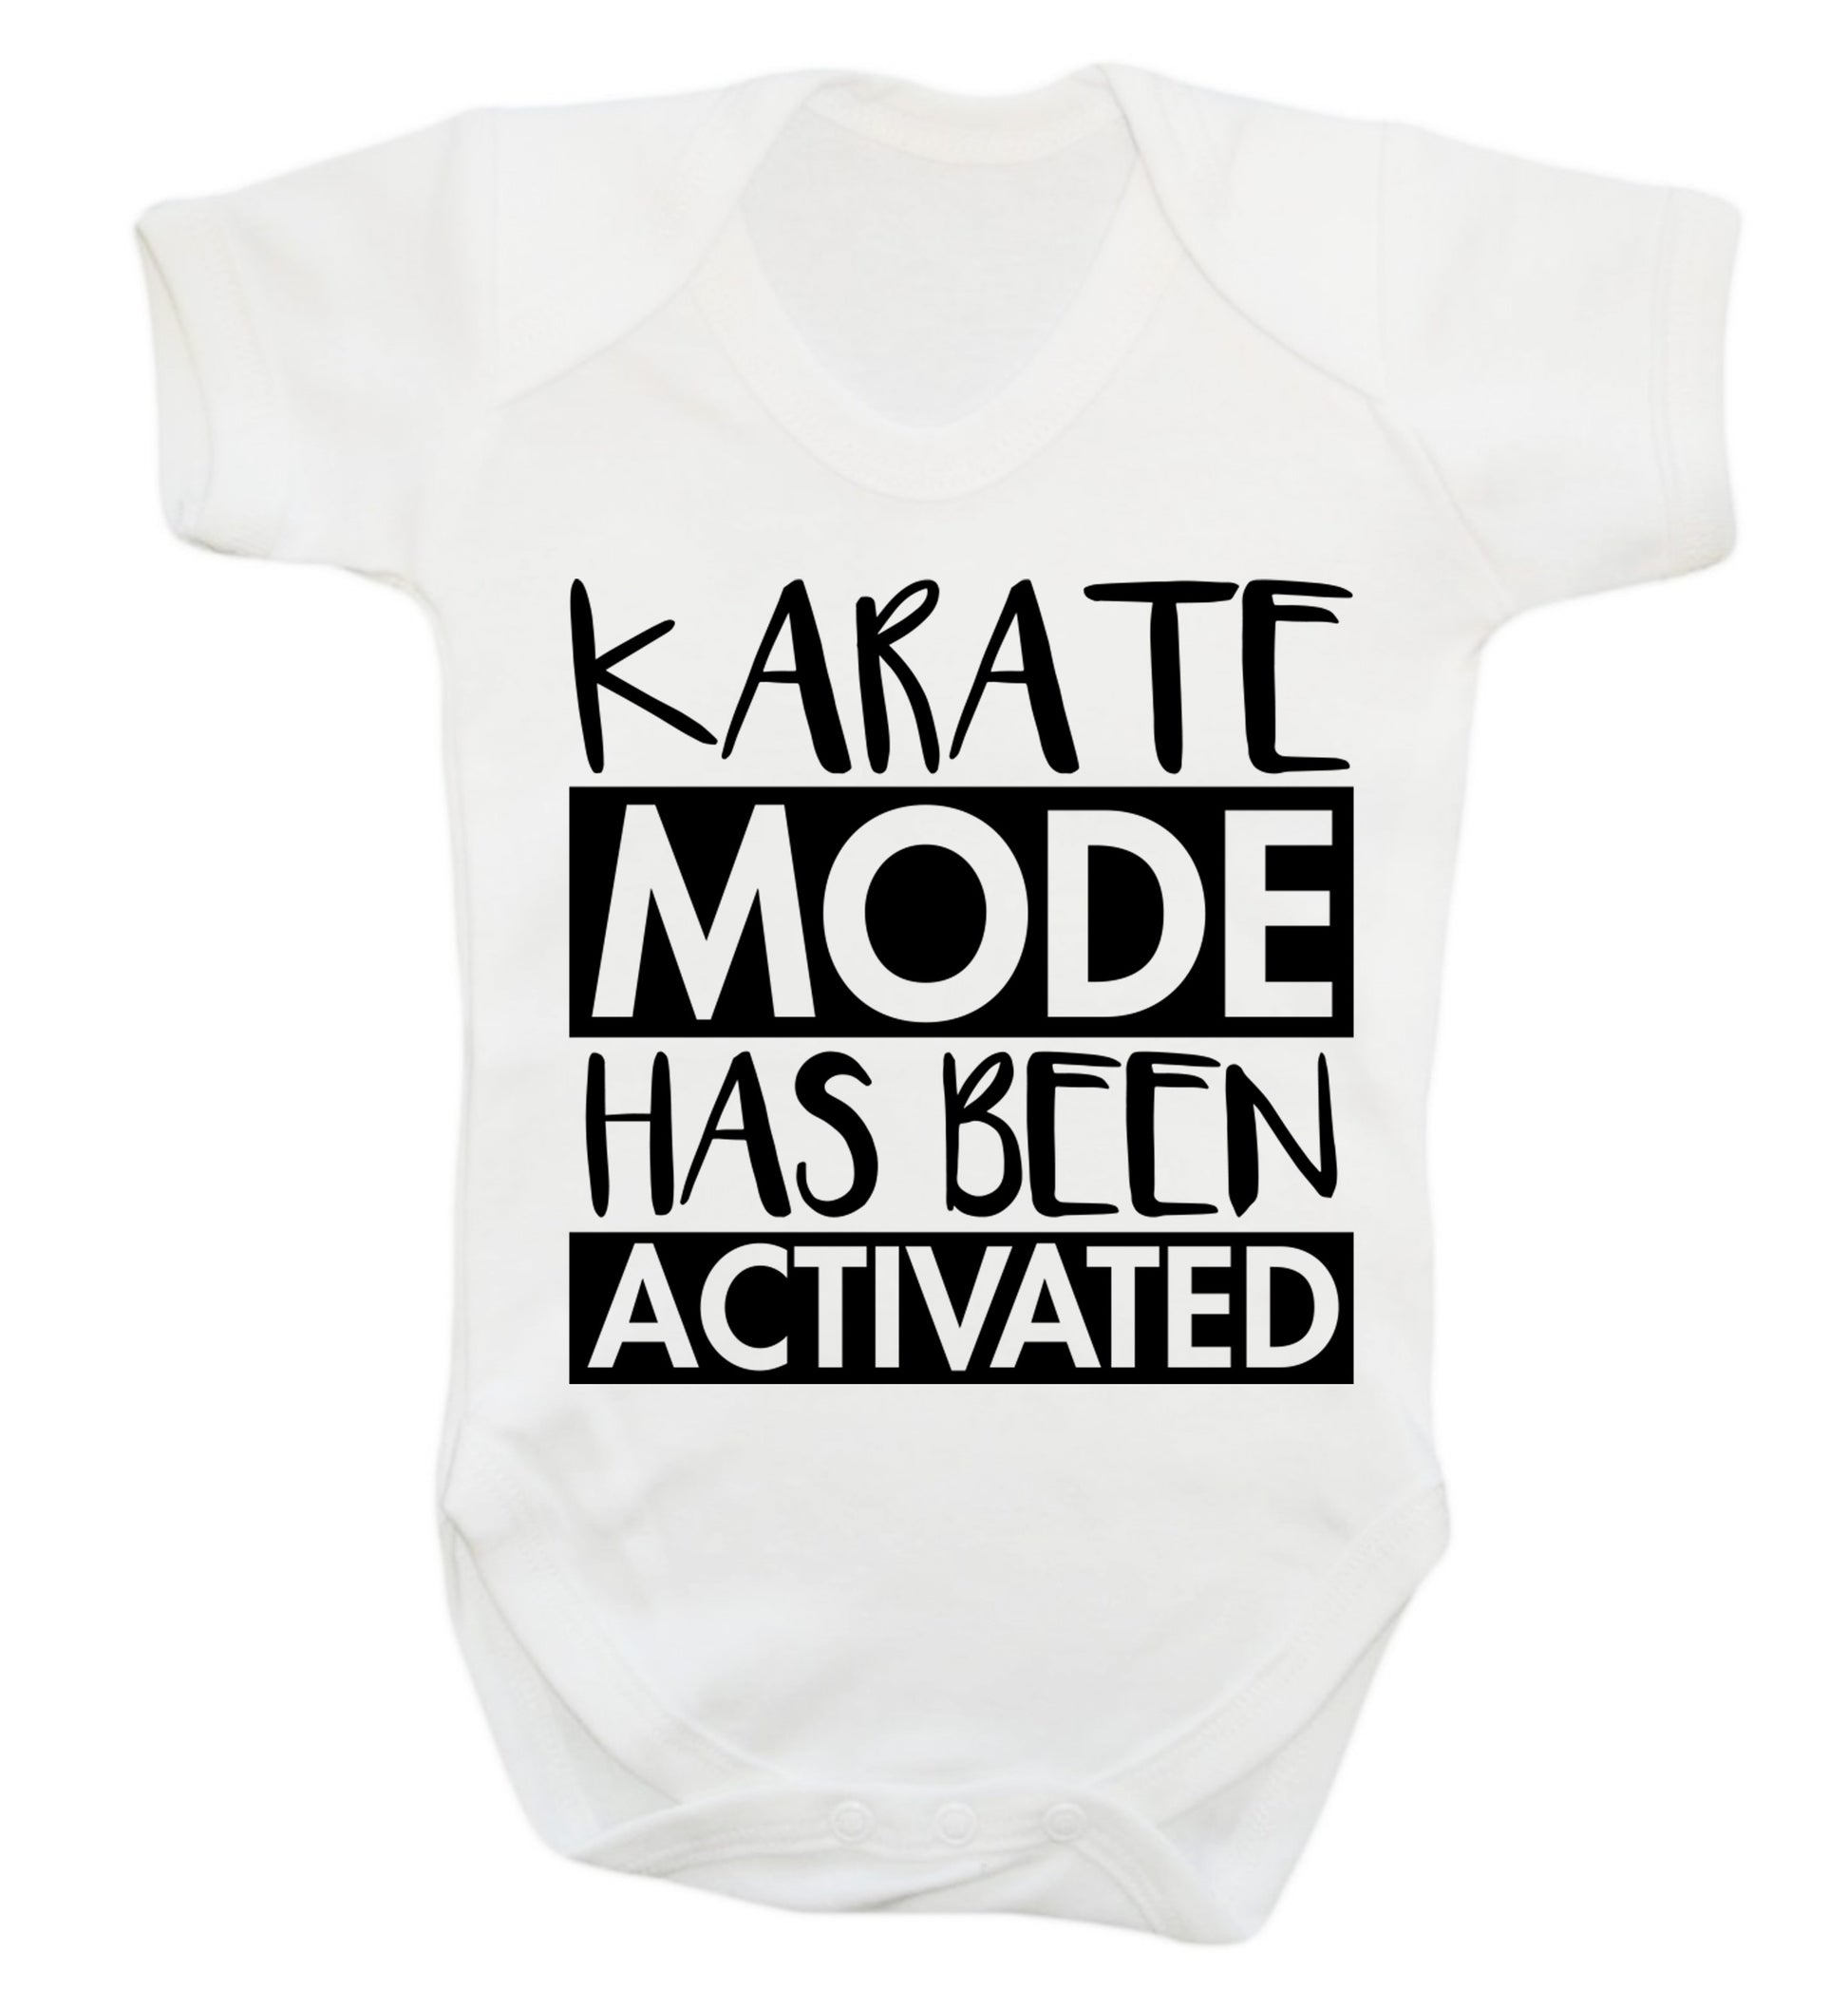 Karate mode activated Baby Vest white 18-24 months